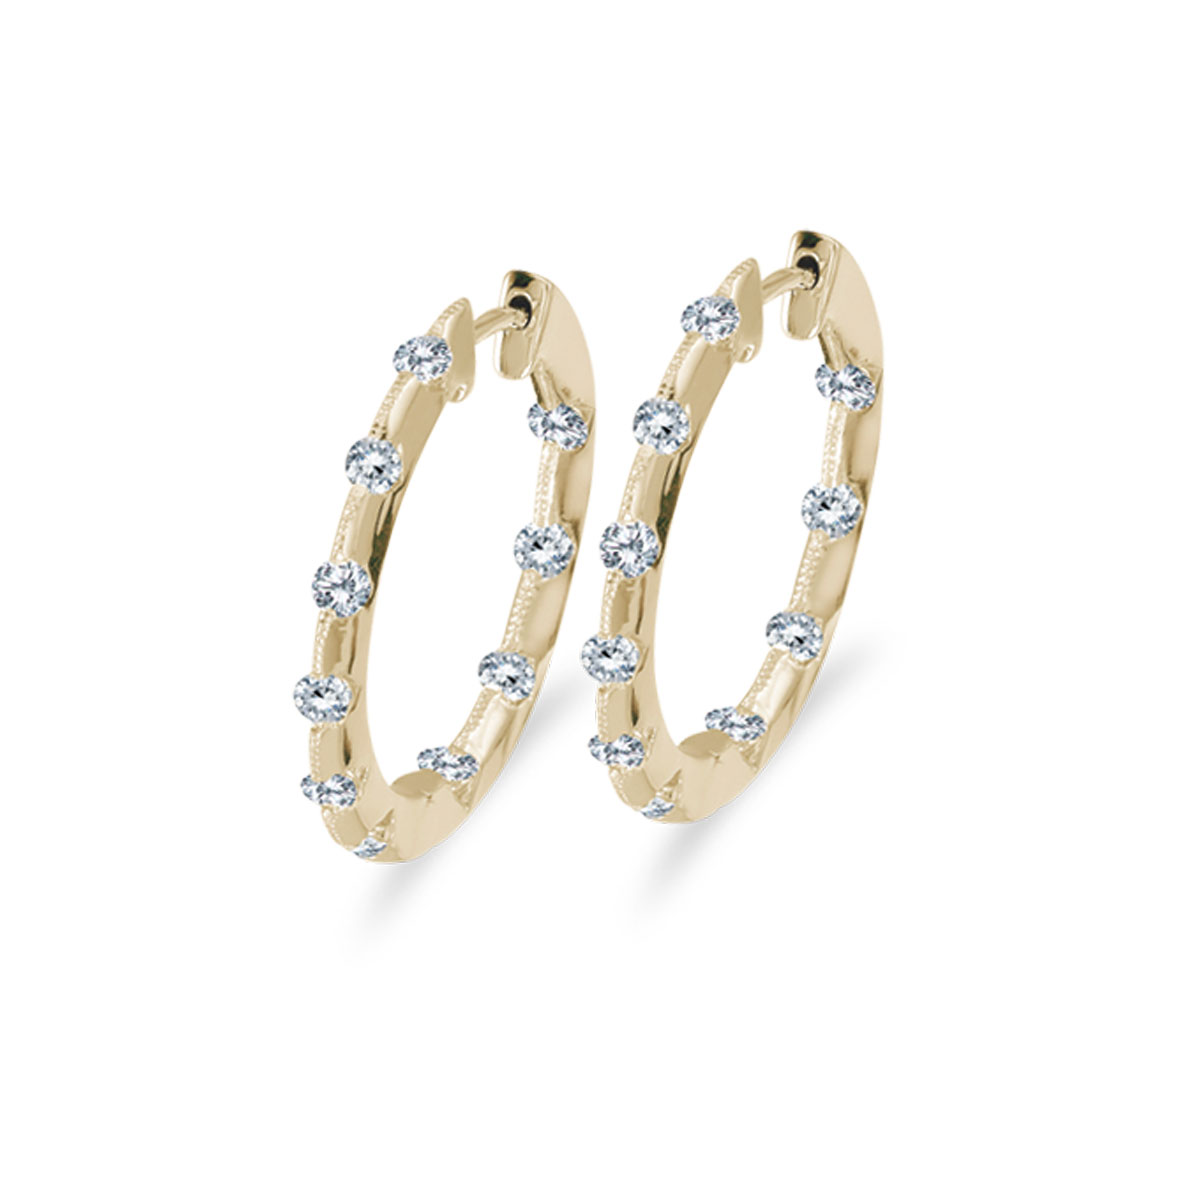 JCX2386: 19 mm diamond inside/outside hoop earrings in beautiful 14k yellow gold. The perfect look for day or night. .50 carat genuine diamonds.